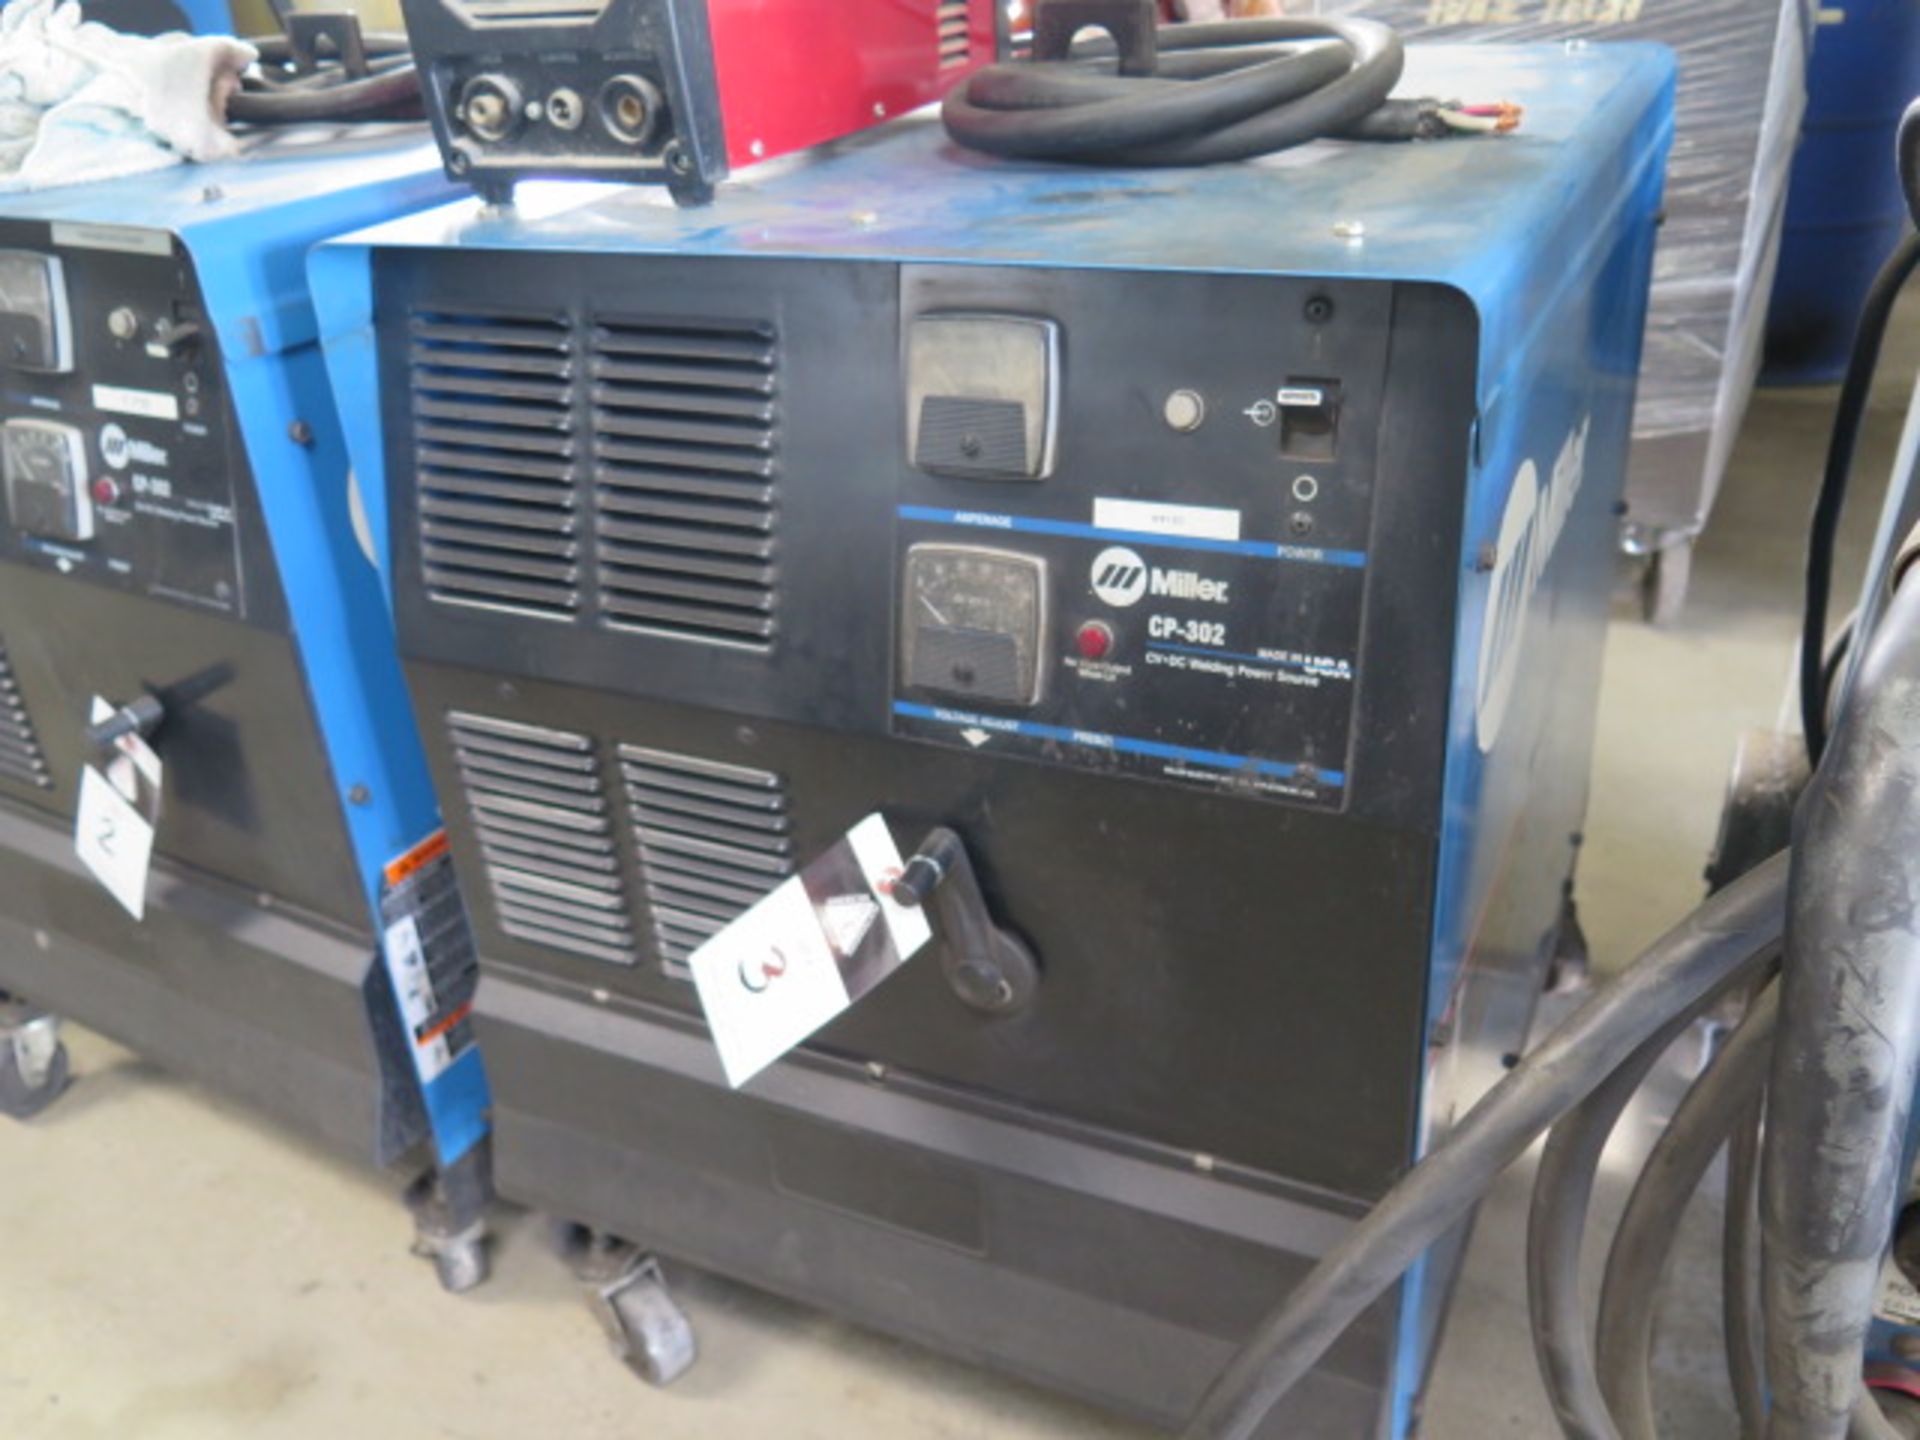 Miller CP-302 CV-DC Arc Welding Power Source (SOLD AS-IS - NO WARRANTY) - Image 2 of 4